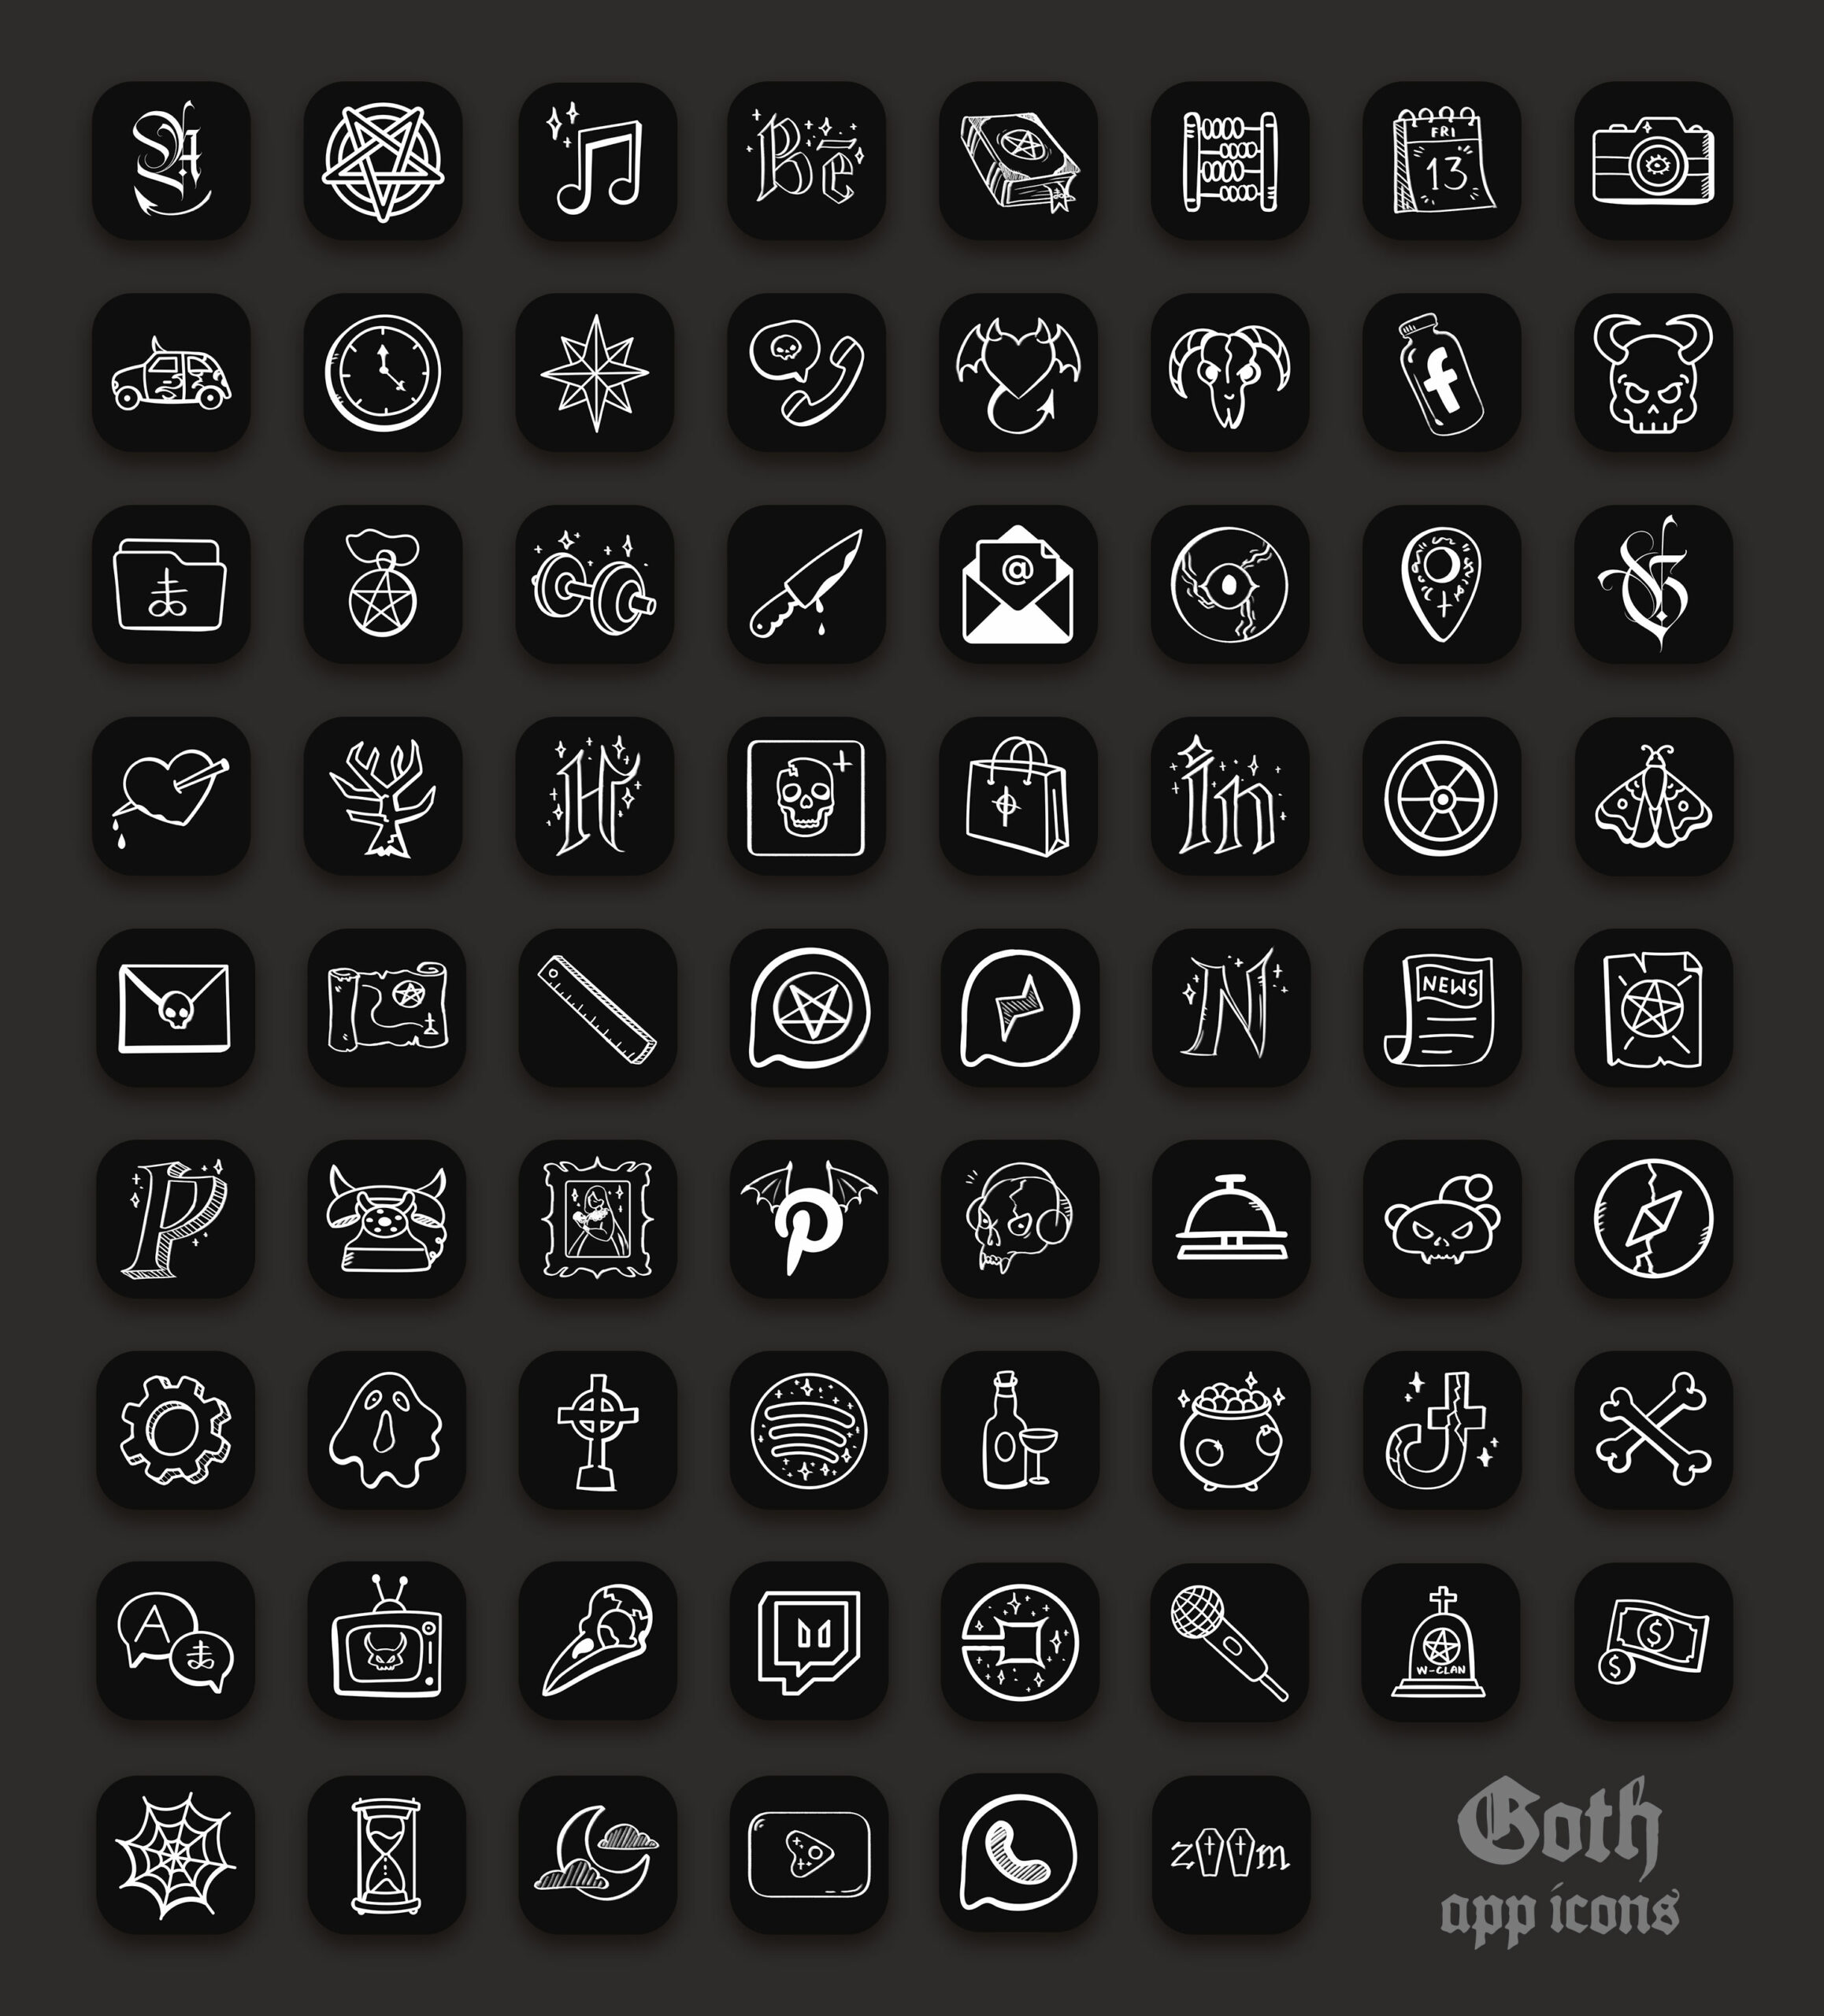 goth app icons pack preview 2